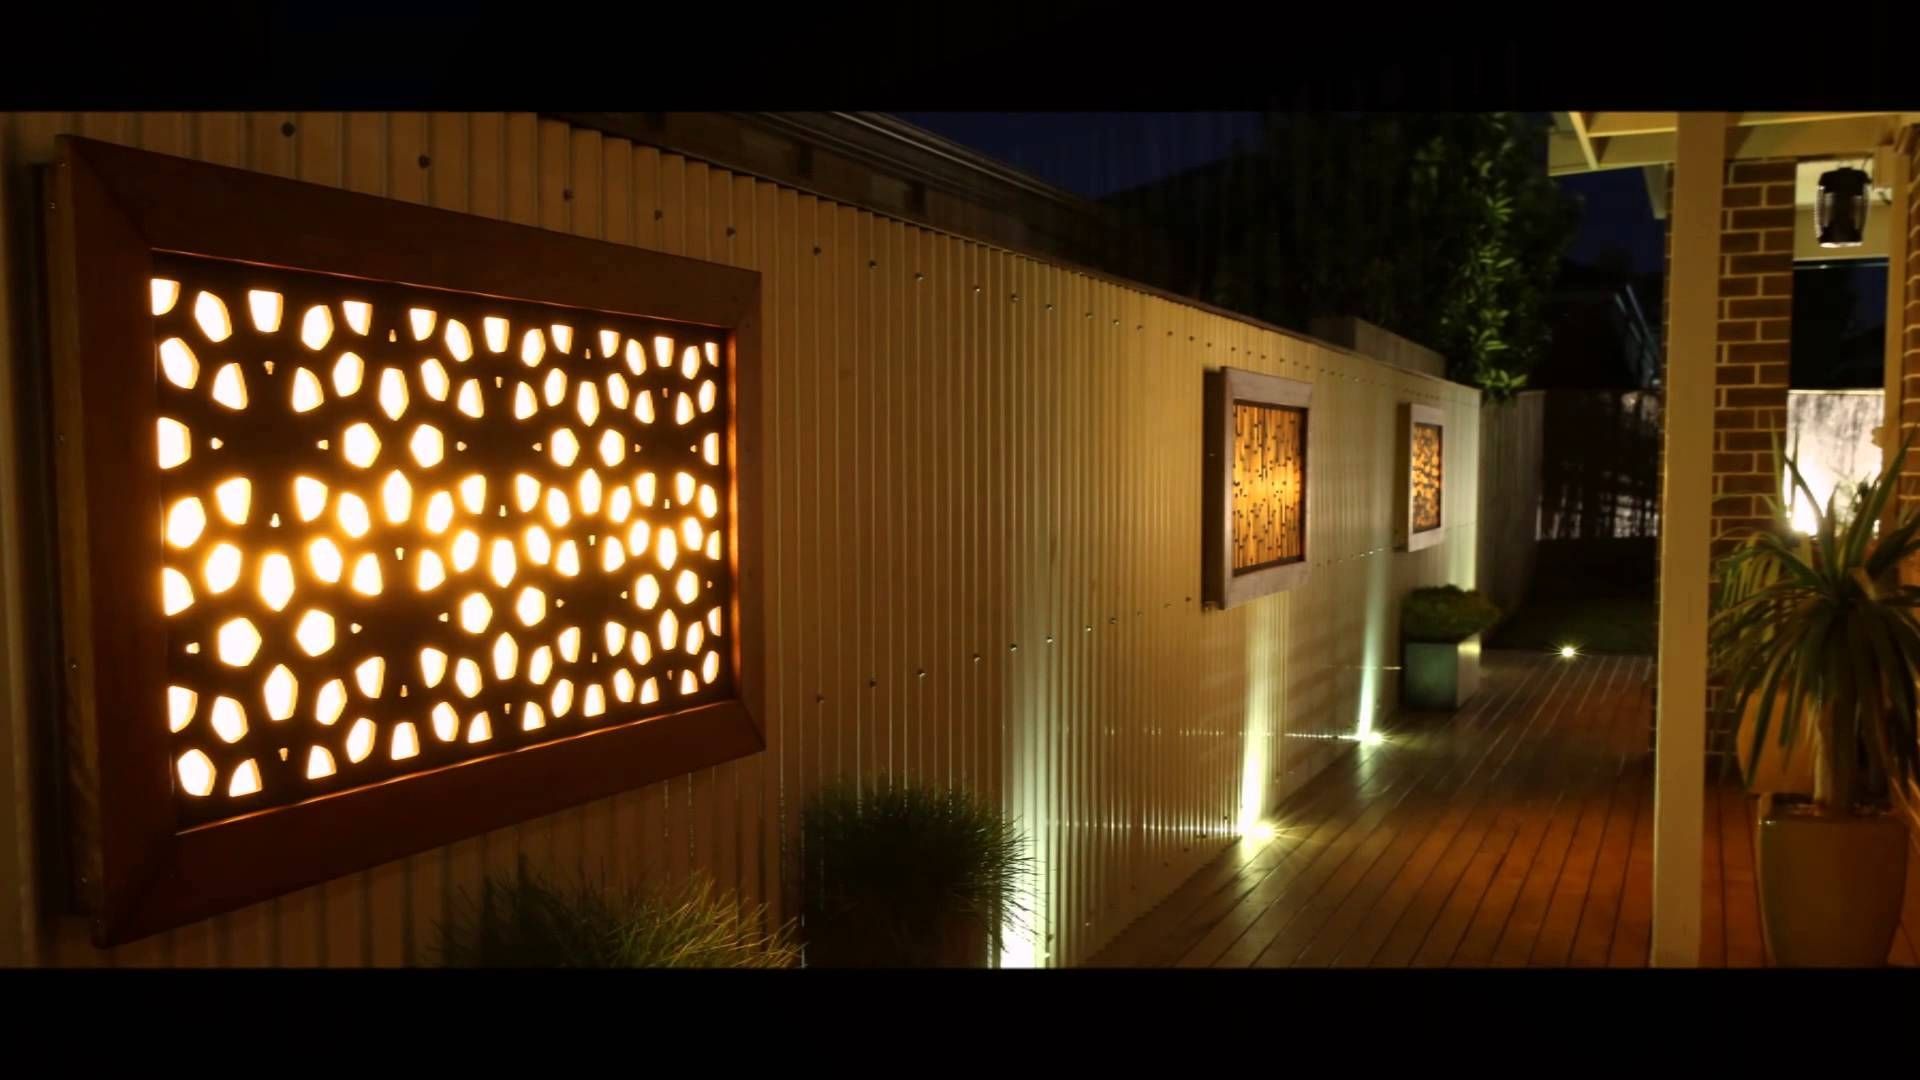 Litecrafts – Wall Art – Outdoor Feature Led – Light Boxes And Intended For Recent Wall Art With Lights (View 2 of 20)